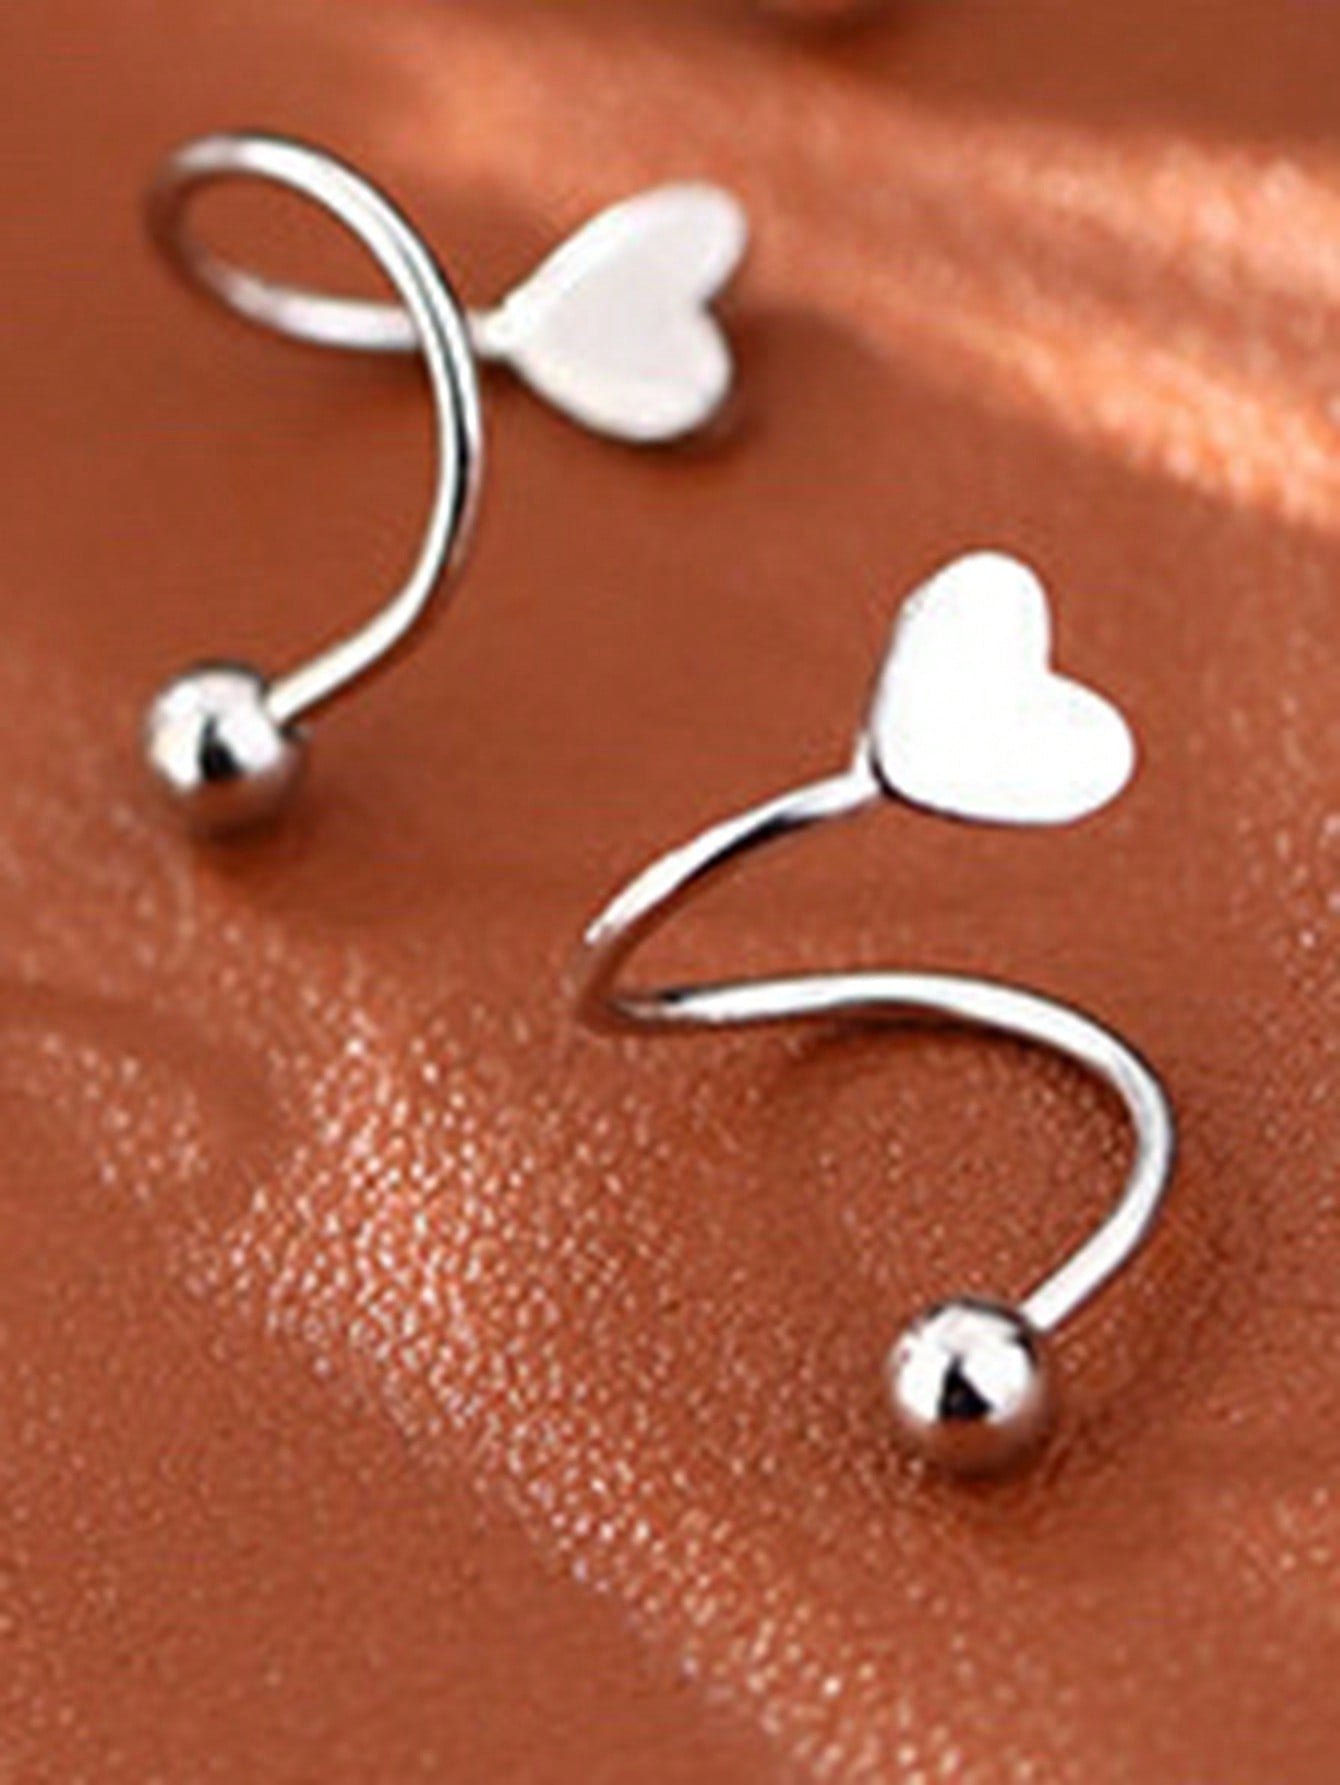 Pure Silver Spiral Heart Shaped Stud Earrings For Women Trendy versatile design Suitable For Sleep Party Wear Great Gift For Festival Daily Wear - La Veliere